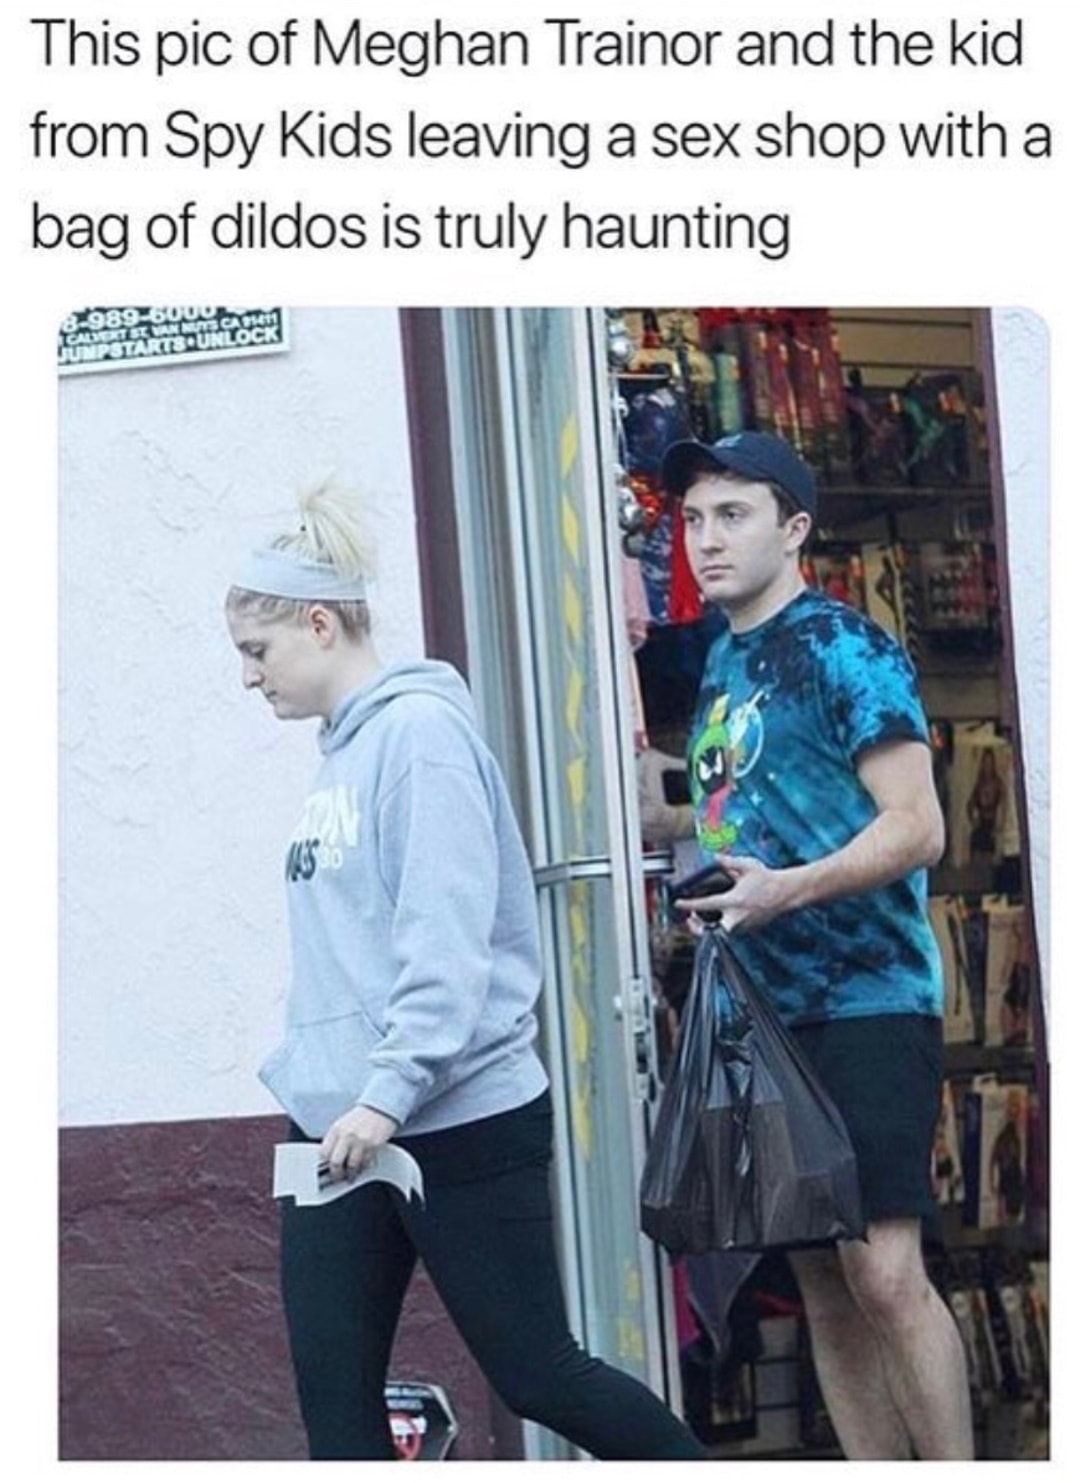 meghan trainor sex shop - This pic of Meghan Trainor and the kid from Spy Kids leaving a sex shop with a bag of dildos is truly haunting Chant